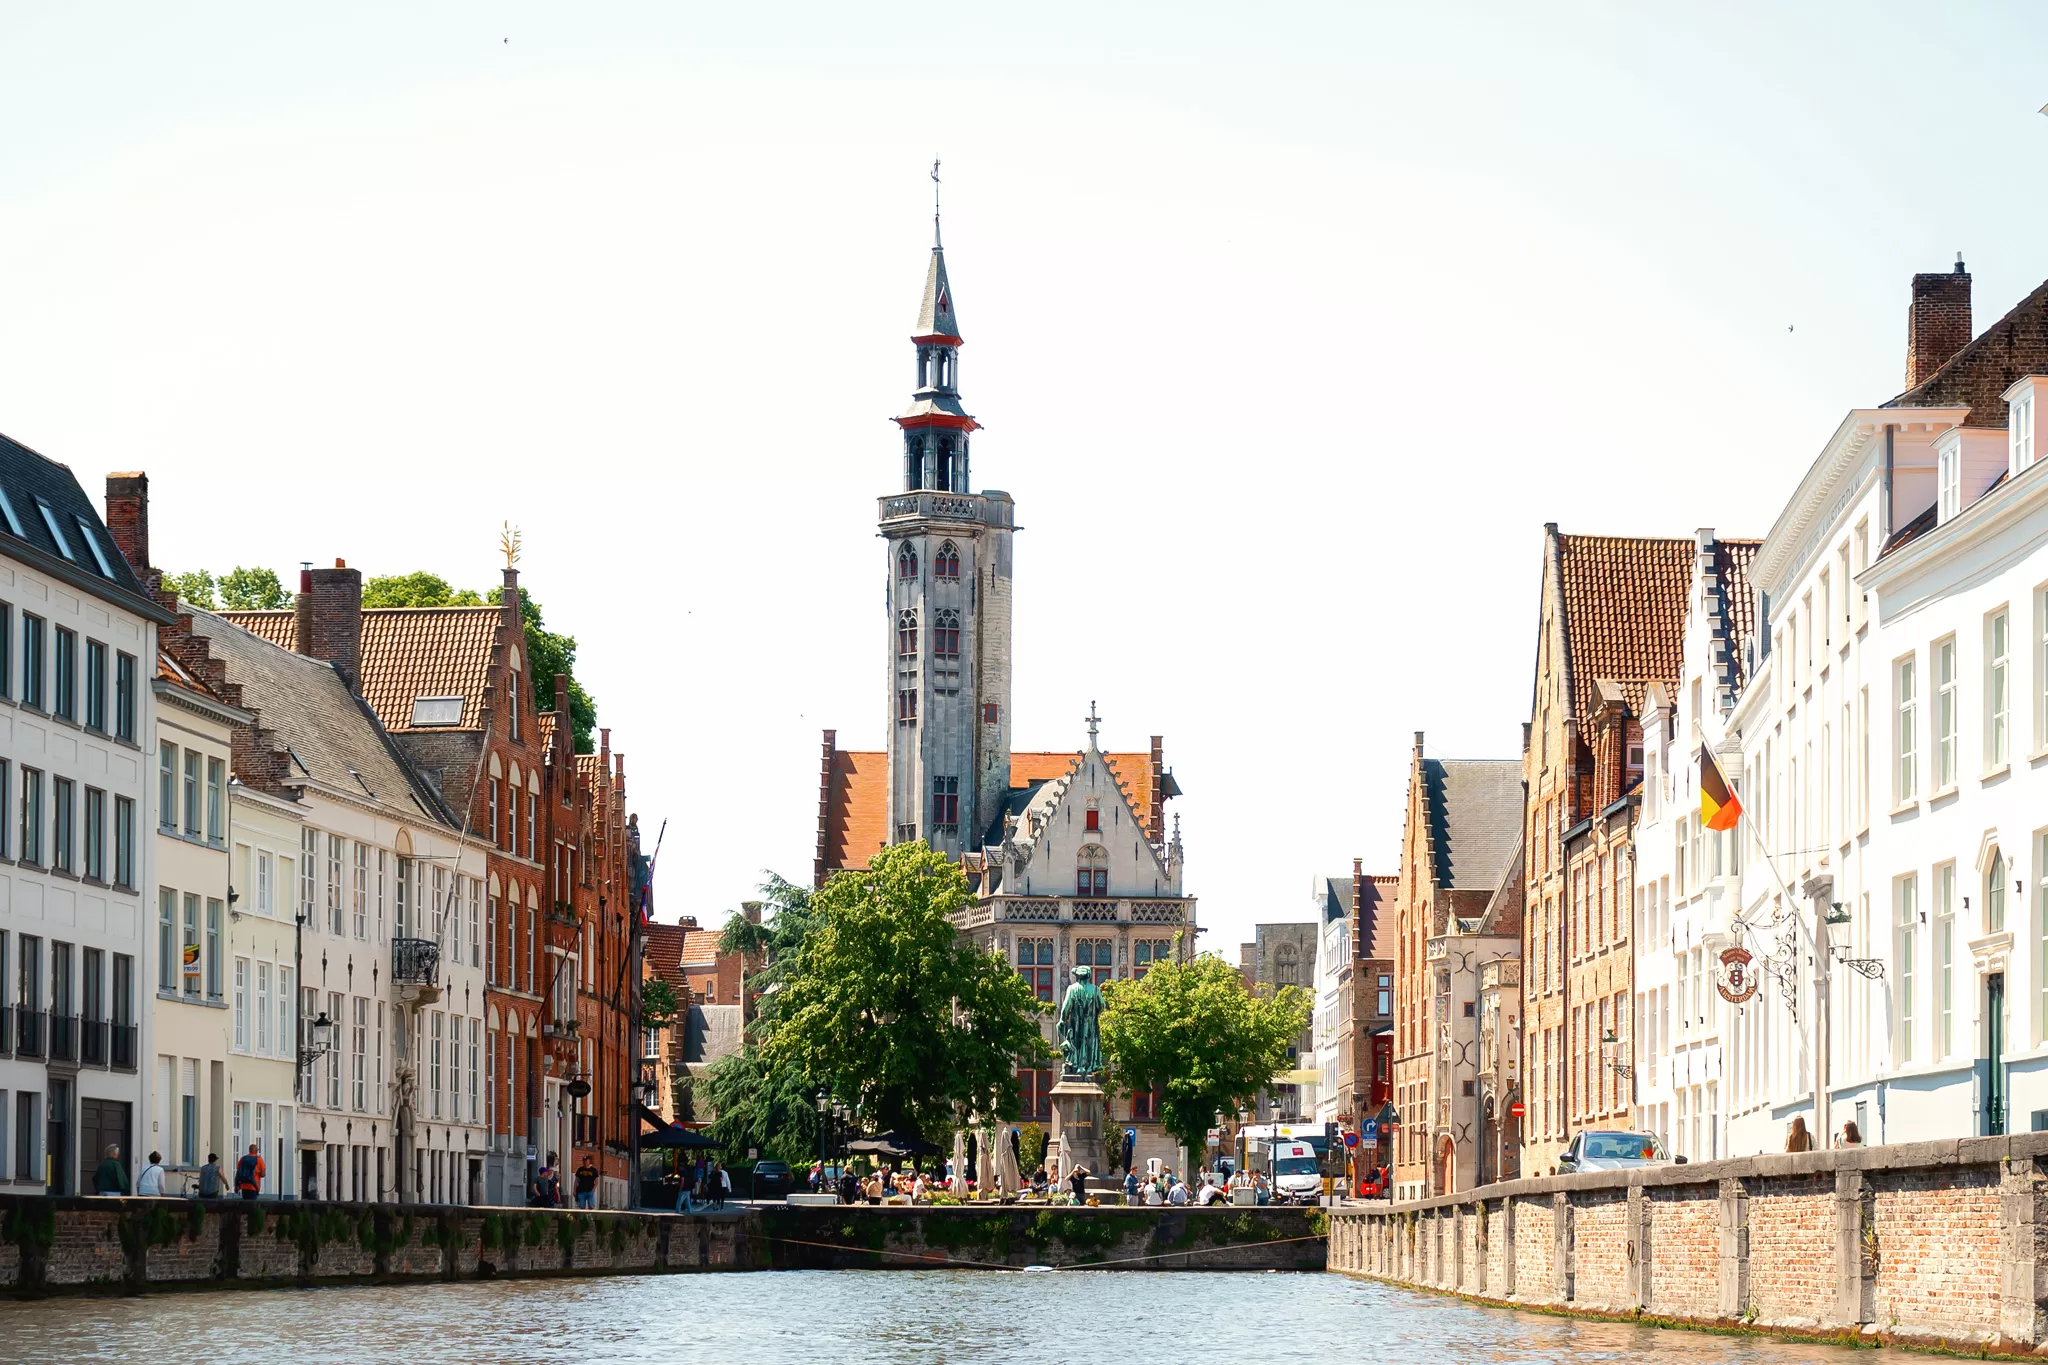 Church of our Lady in Bruges.  Image taked from a canal tour boat